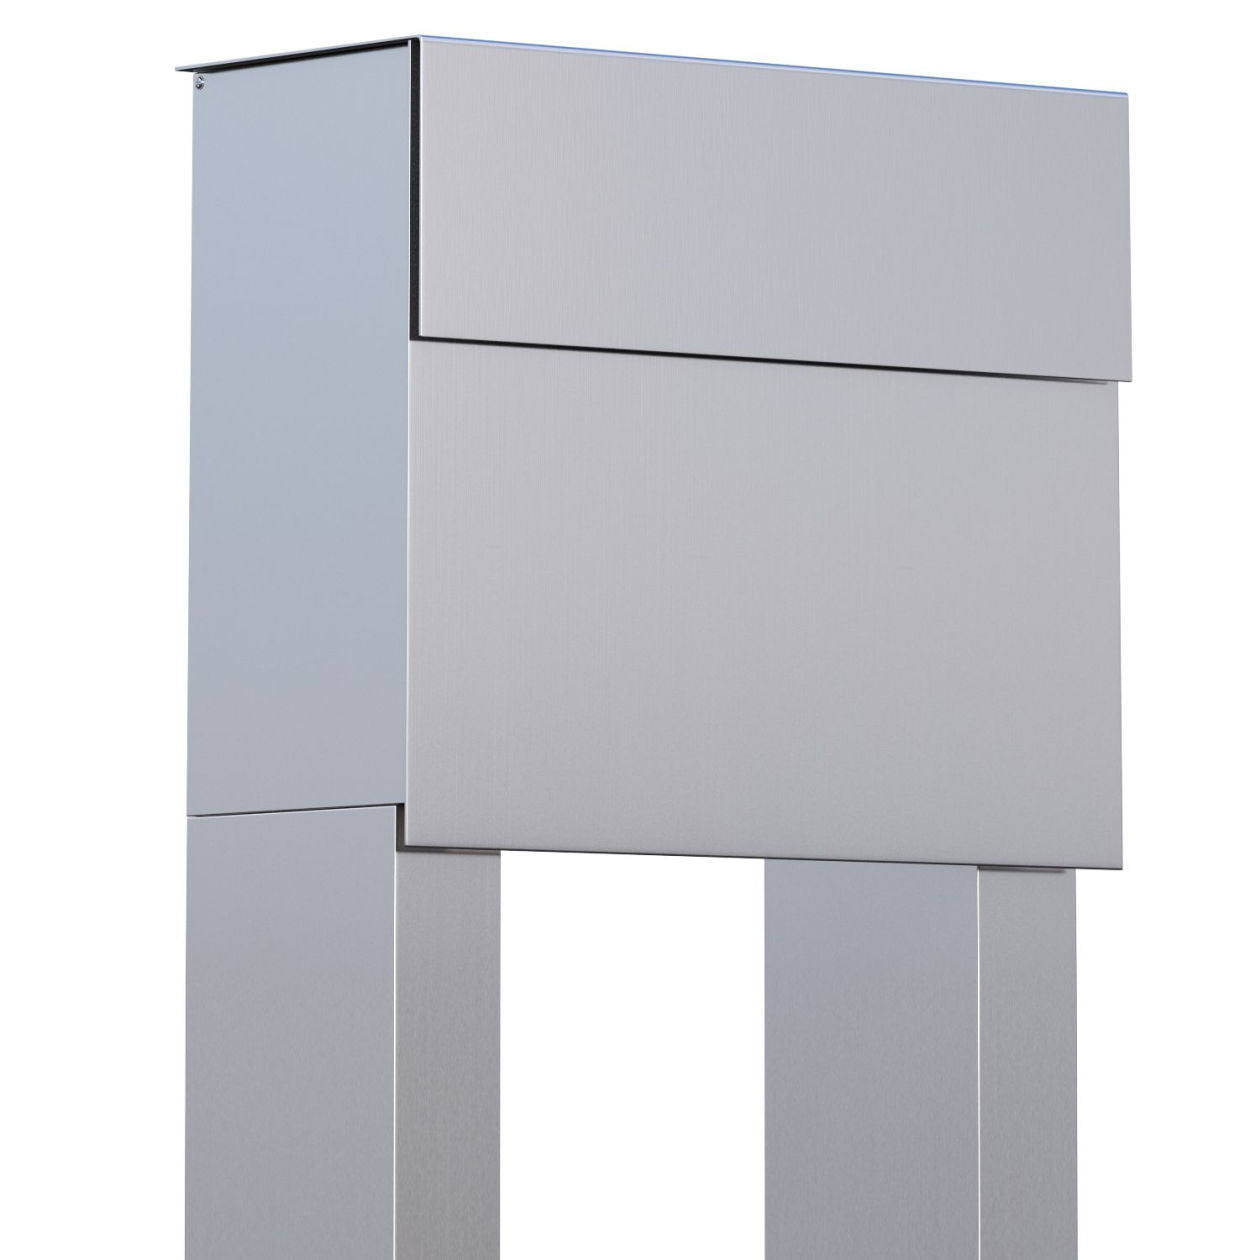 STAND MOLTO by Bravios - Modern post-mounted stainless steel mailbox